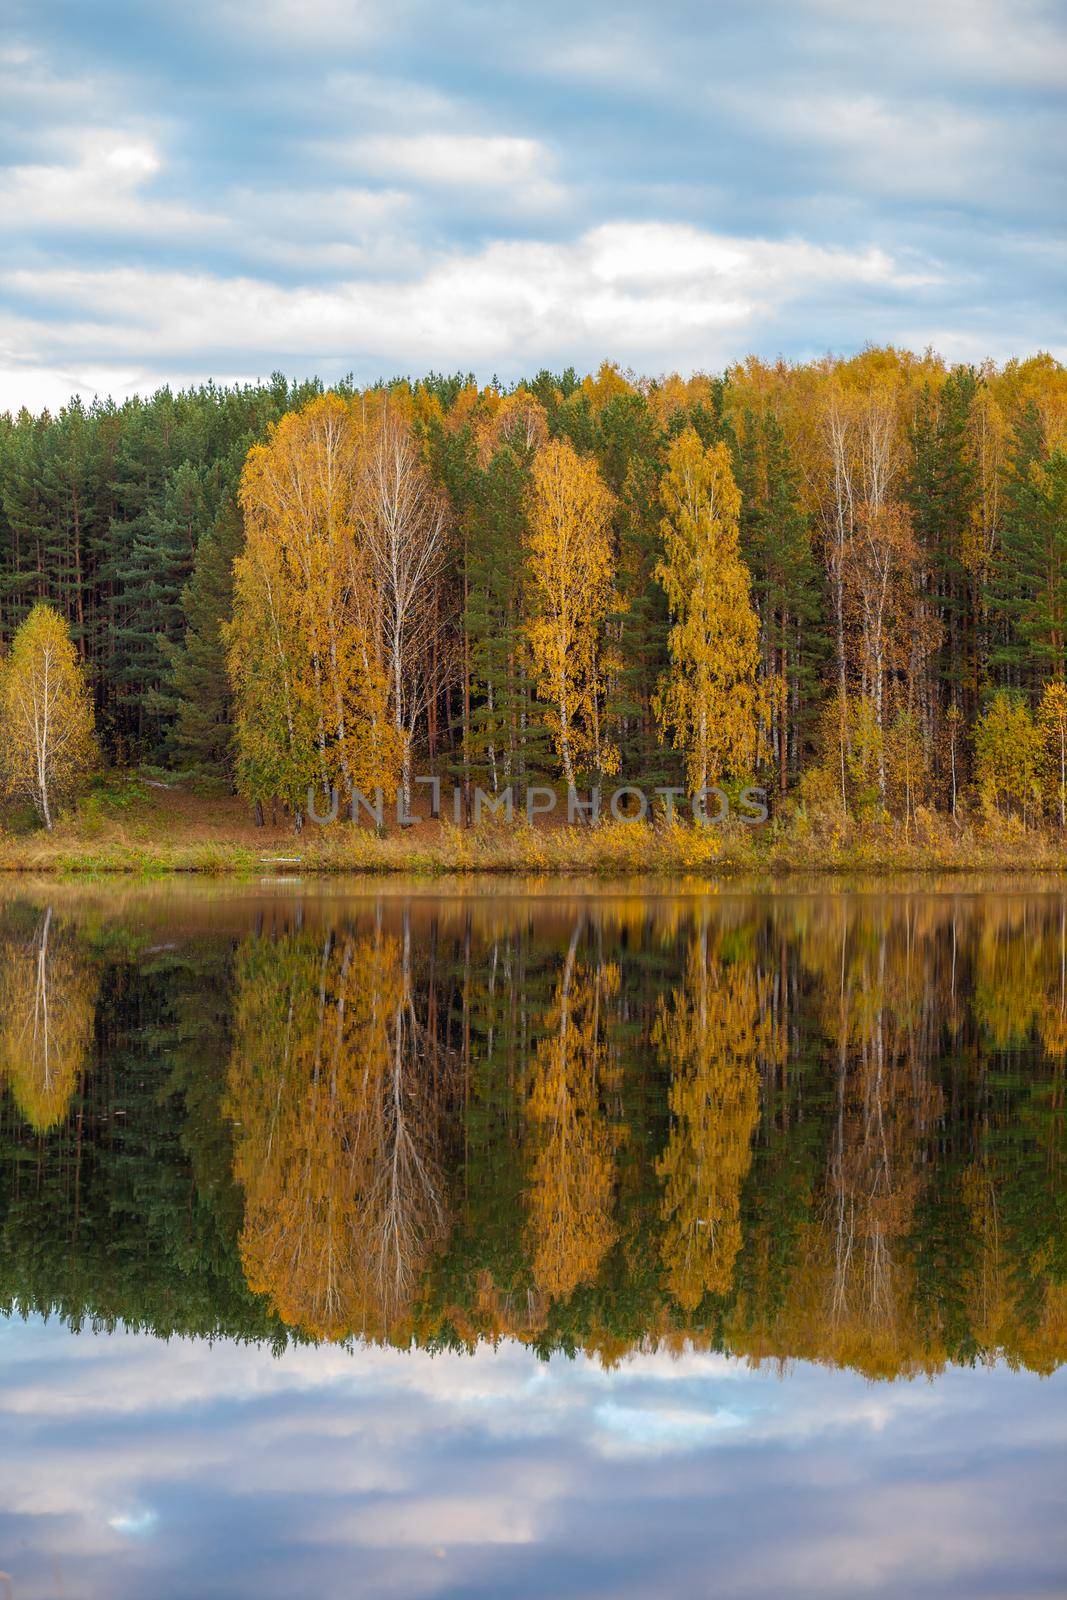 Colorful foliage tree reflections in calm pond water on a beautiful autumn day. A quiet and beautiful place to relax.